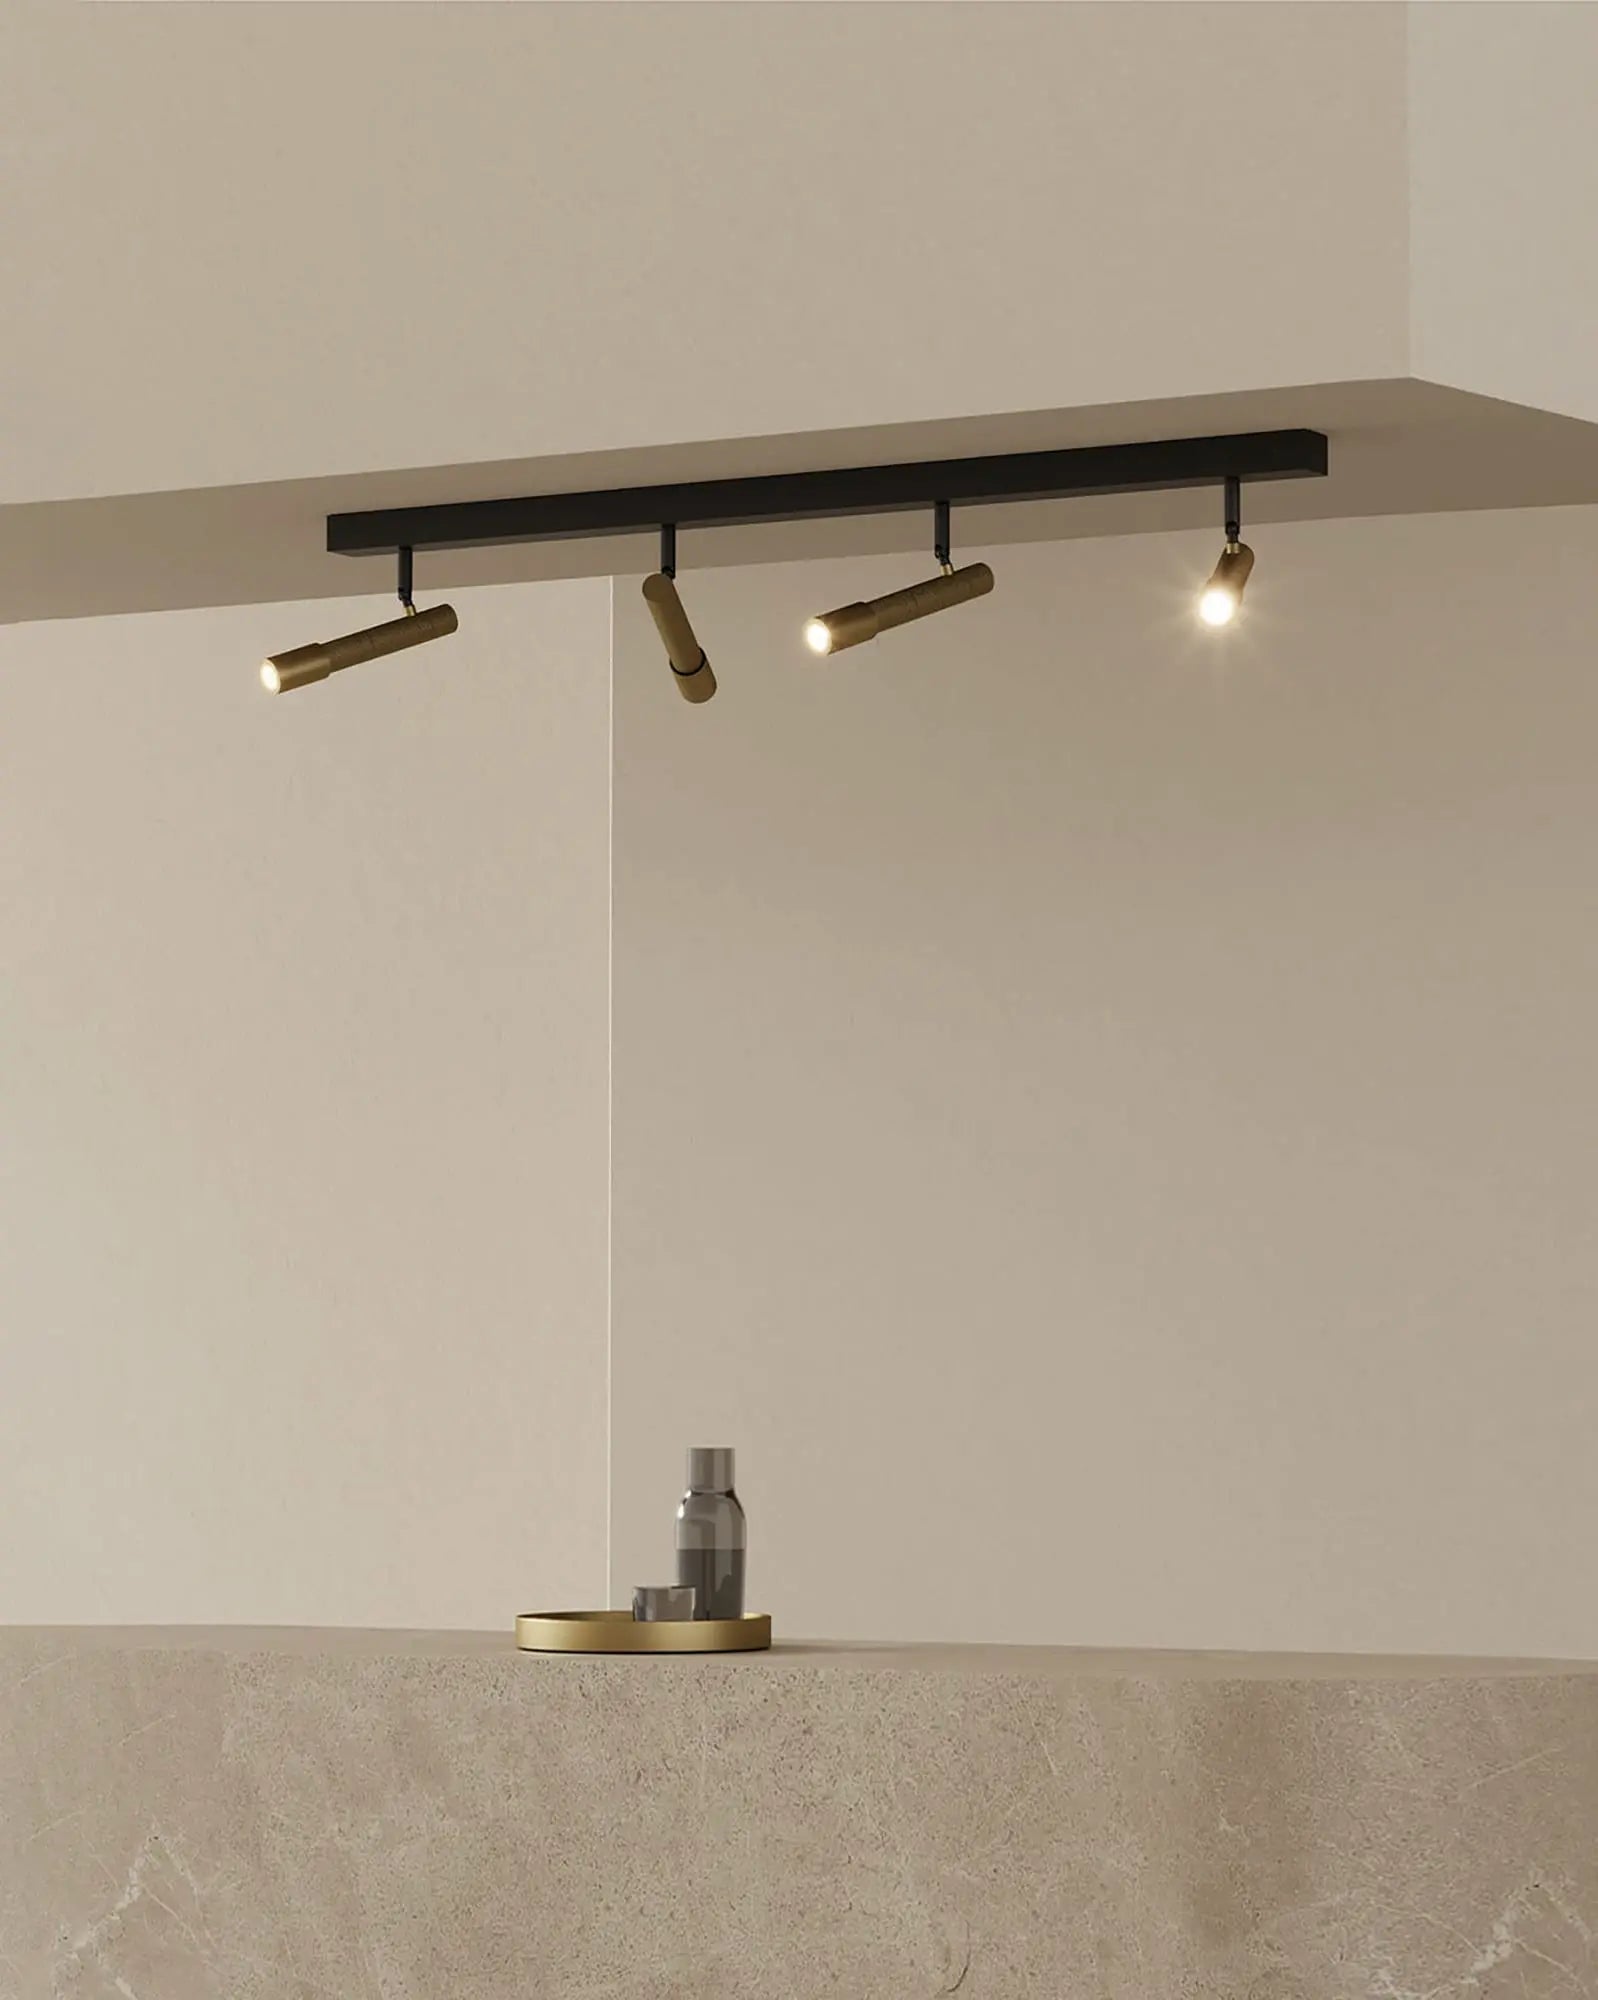 Ycro downlights 4 lights contemporary adjustable heads over a bench